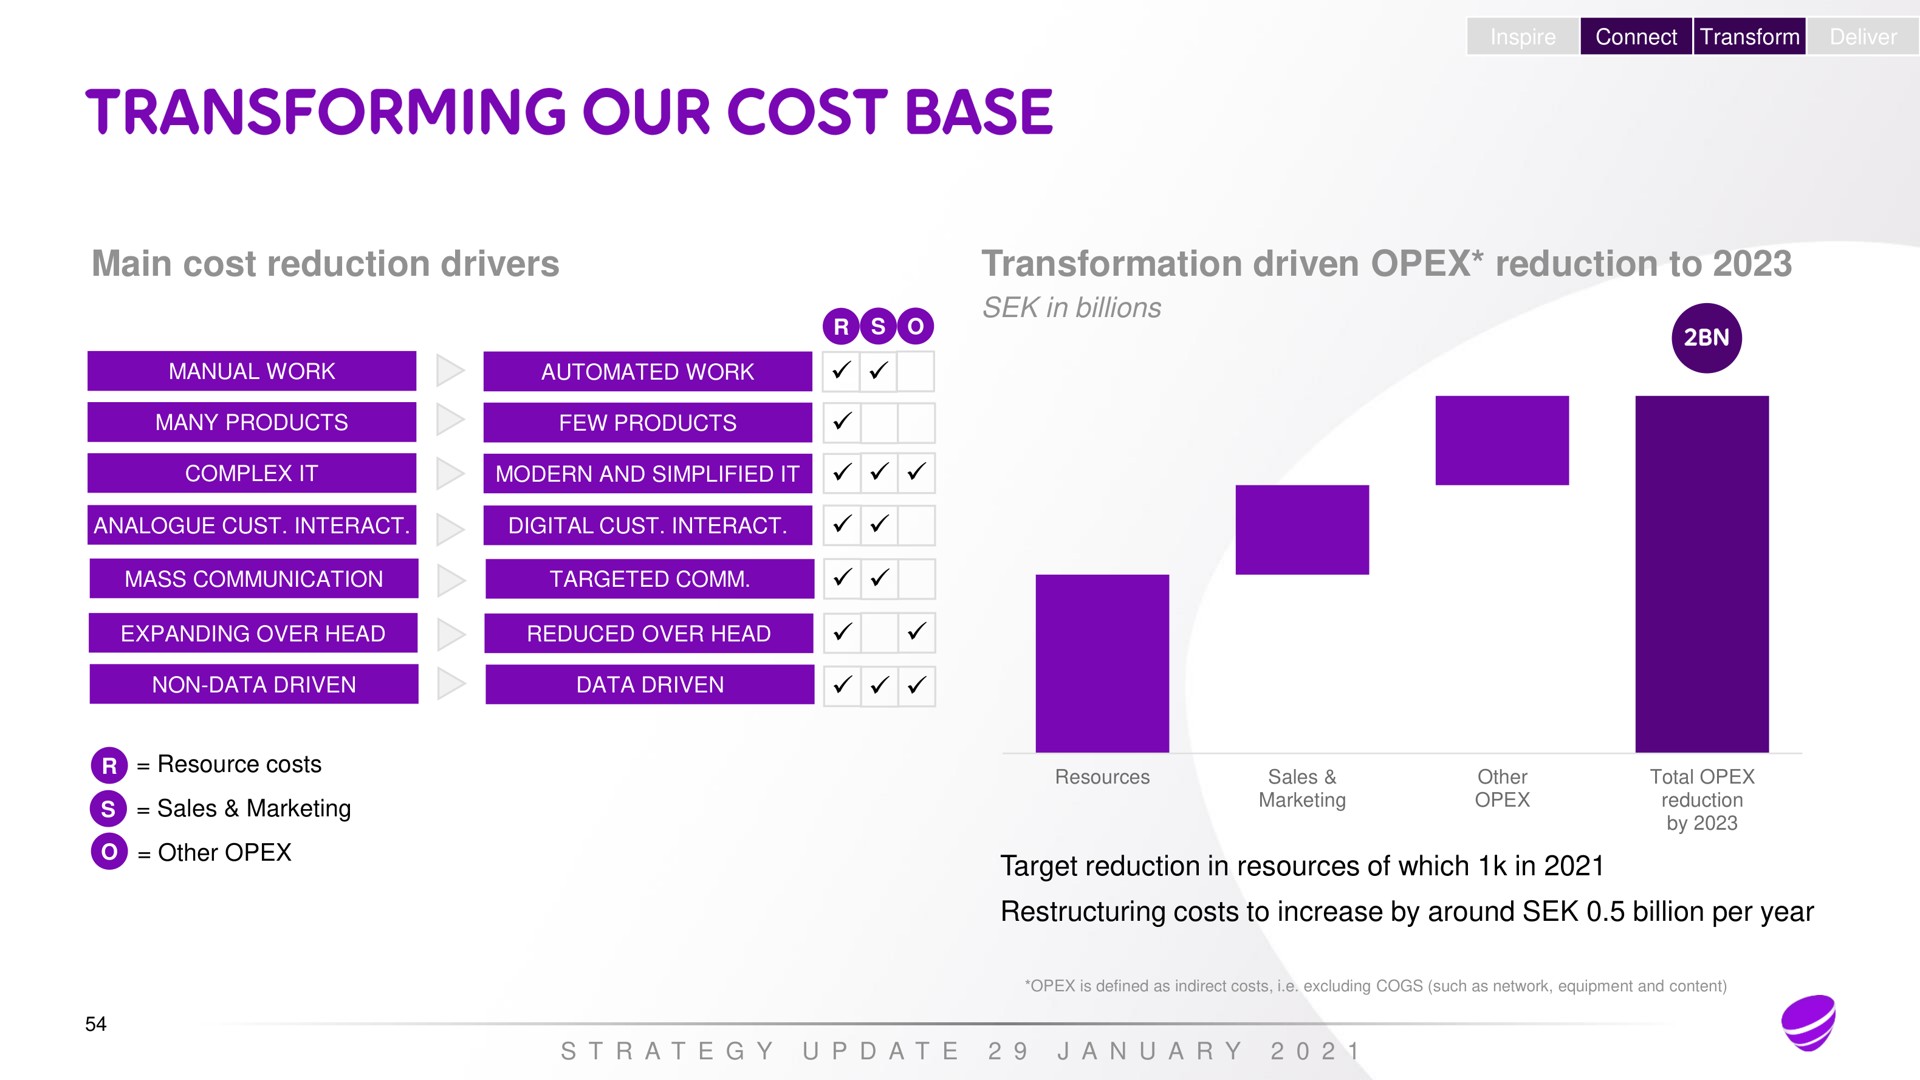 main cost reduction drivers manual work work many products few products complex it modern and simplified it analogue interact digital interact mass communication targeted expanding over head reduced over head non data driven data driven resource costs sales marketing other inspire connect transform deliver transformation driven reduction to in billions target reduction in resources of which in costs to increase by around billion per year a a a a | Telia Company